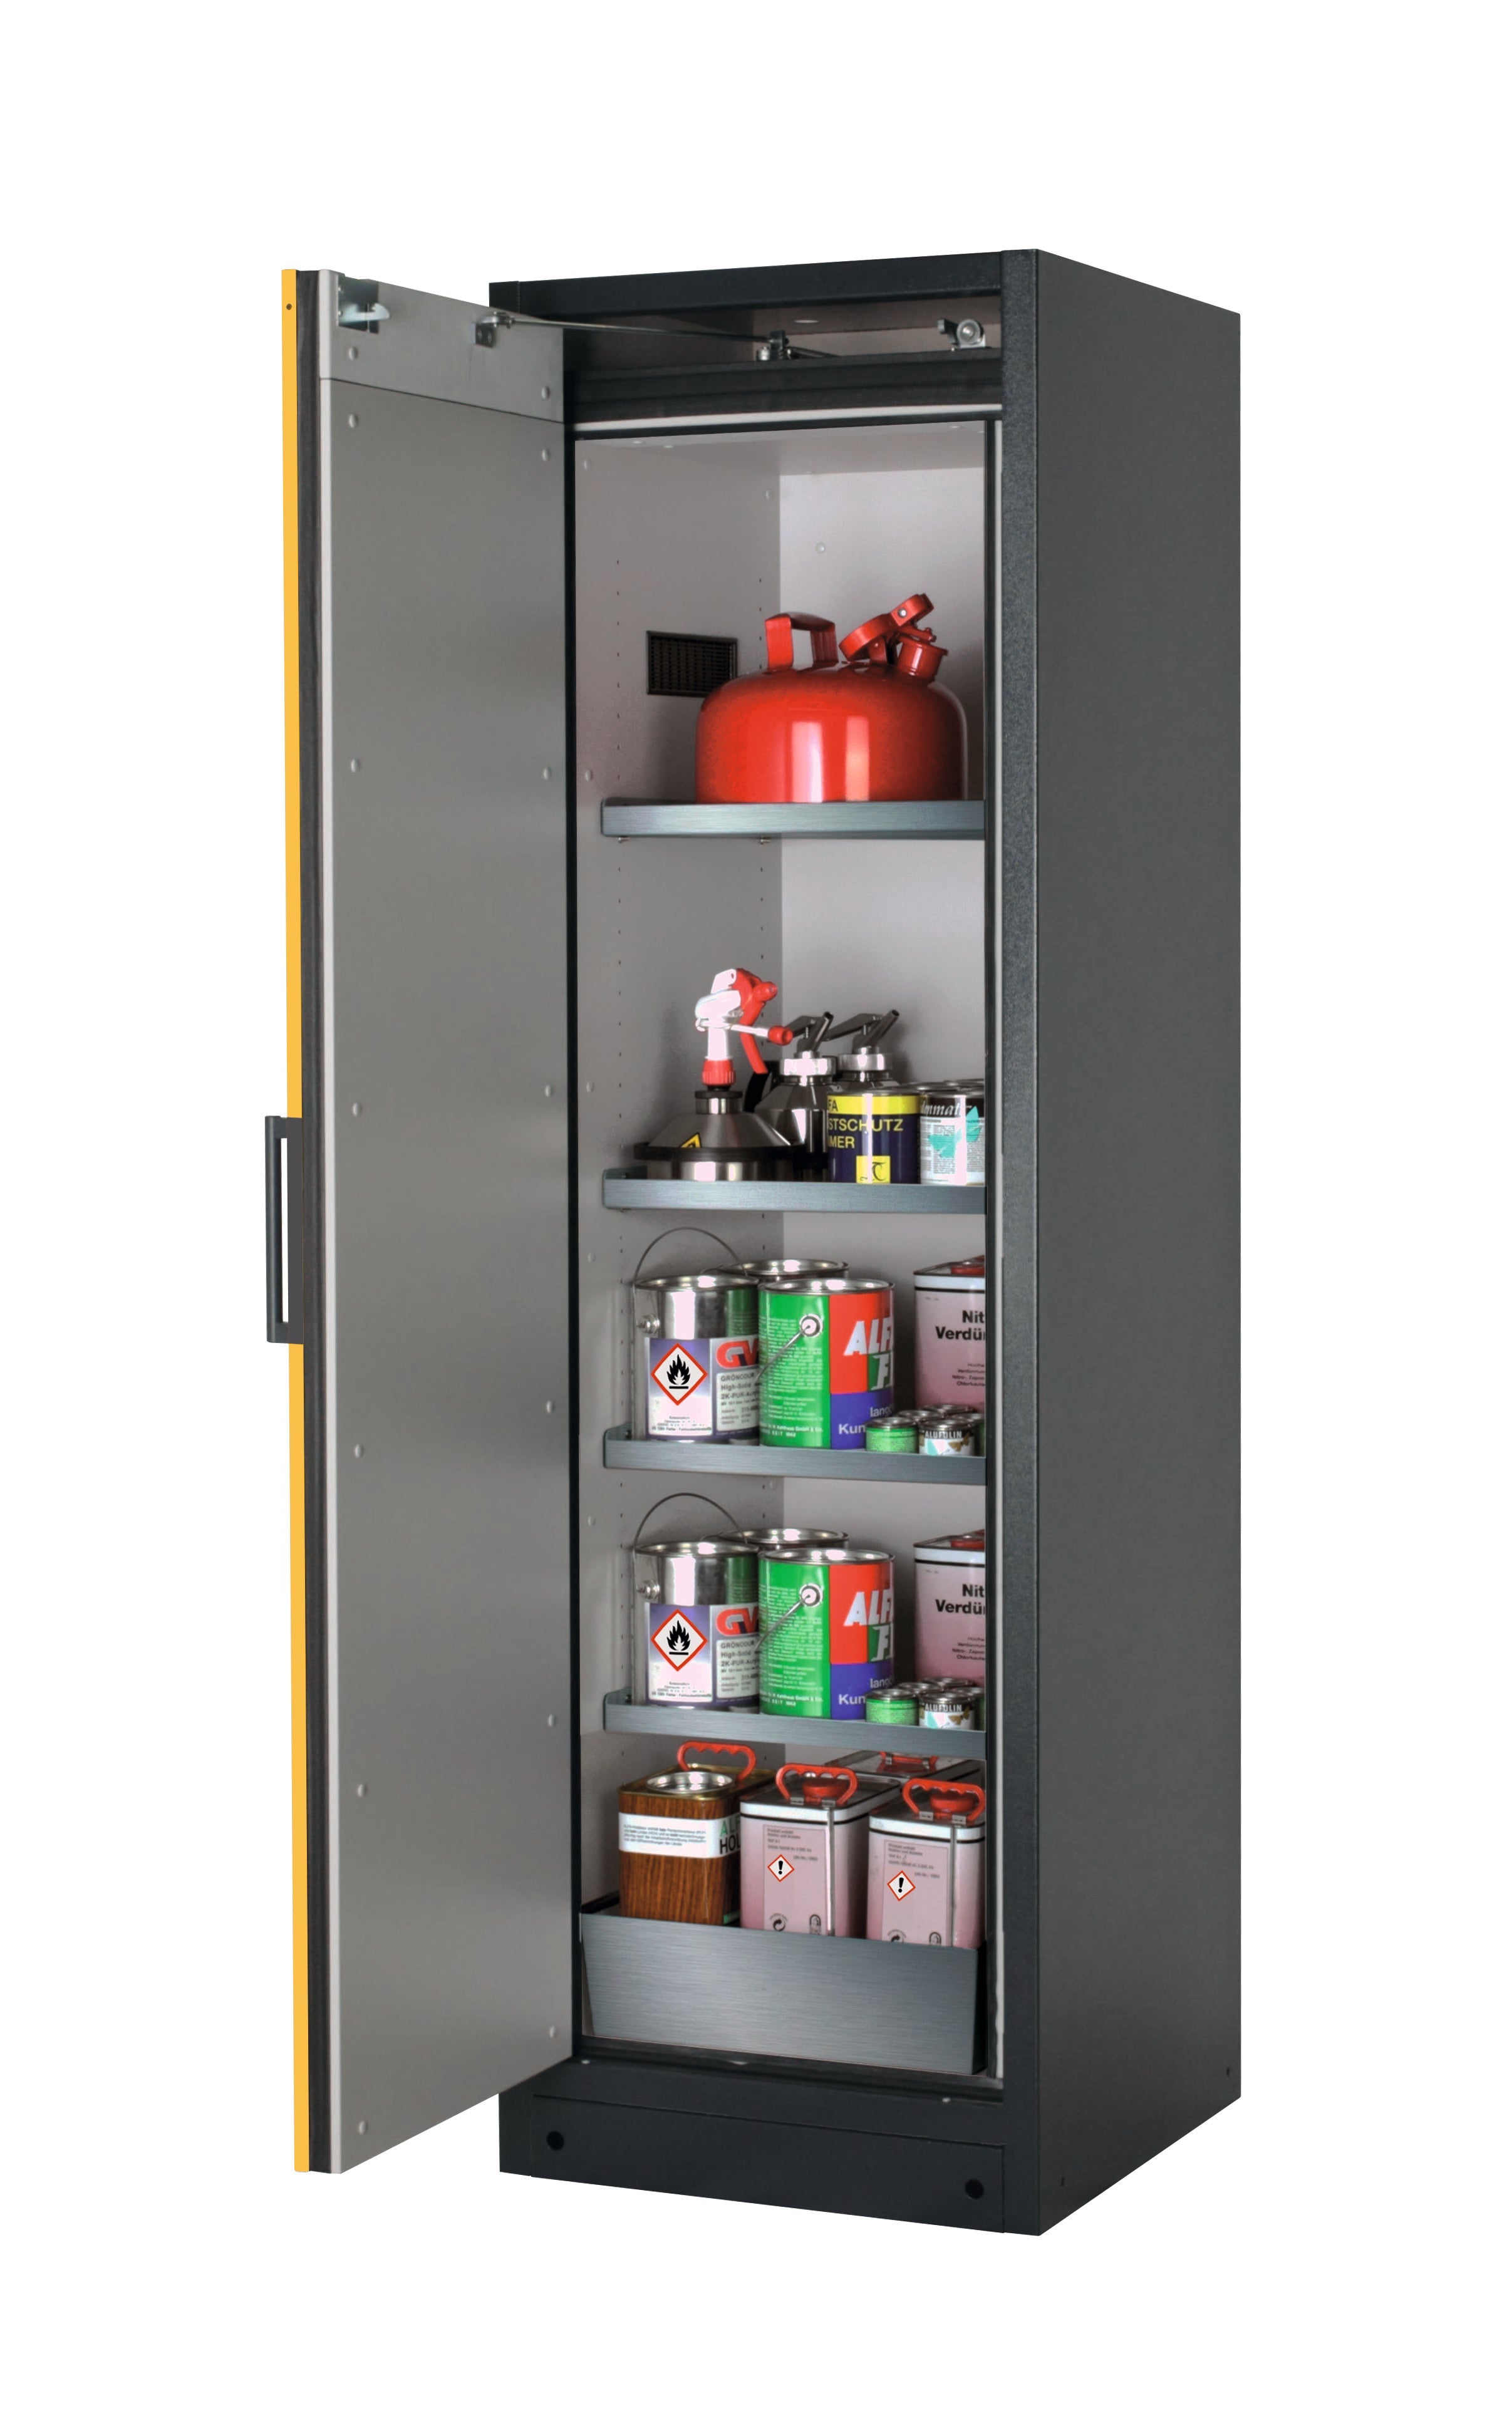 Type 90 safety storage cabinet Q-CLASSIC-90 model Q90.195.060 in warning yellow RAL 1004 with 4x shelf standard (stainless steel 1.4301),